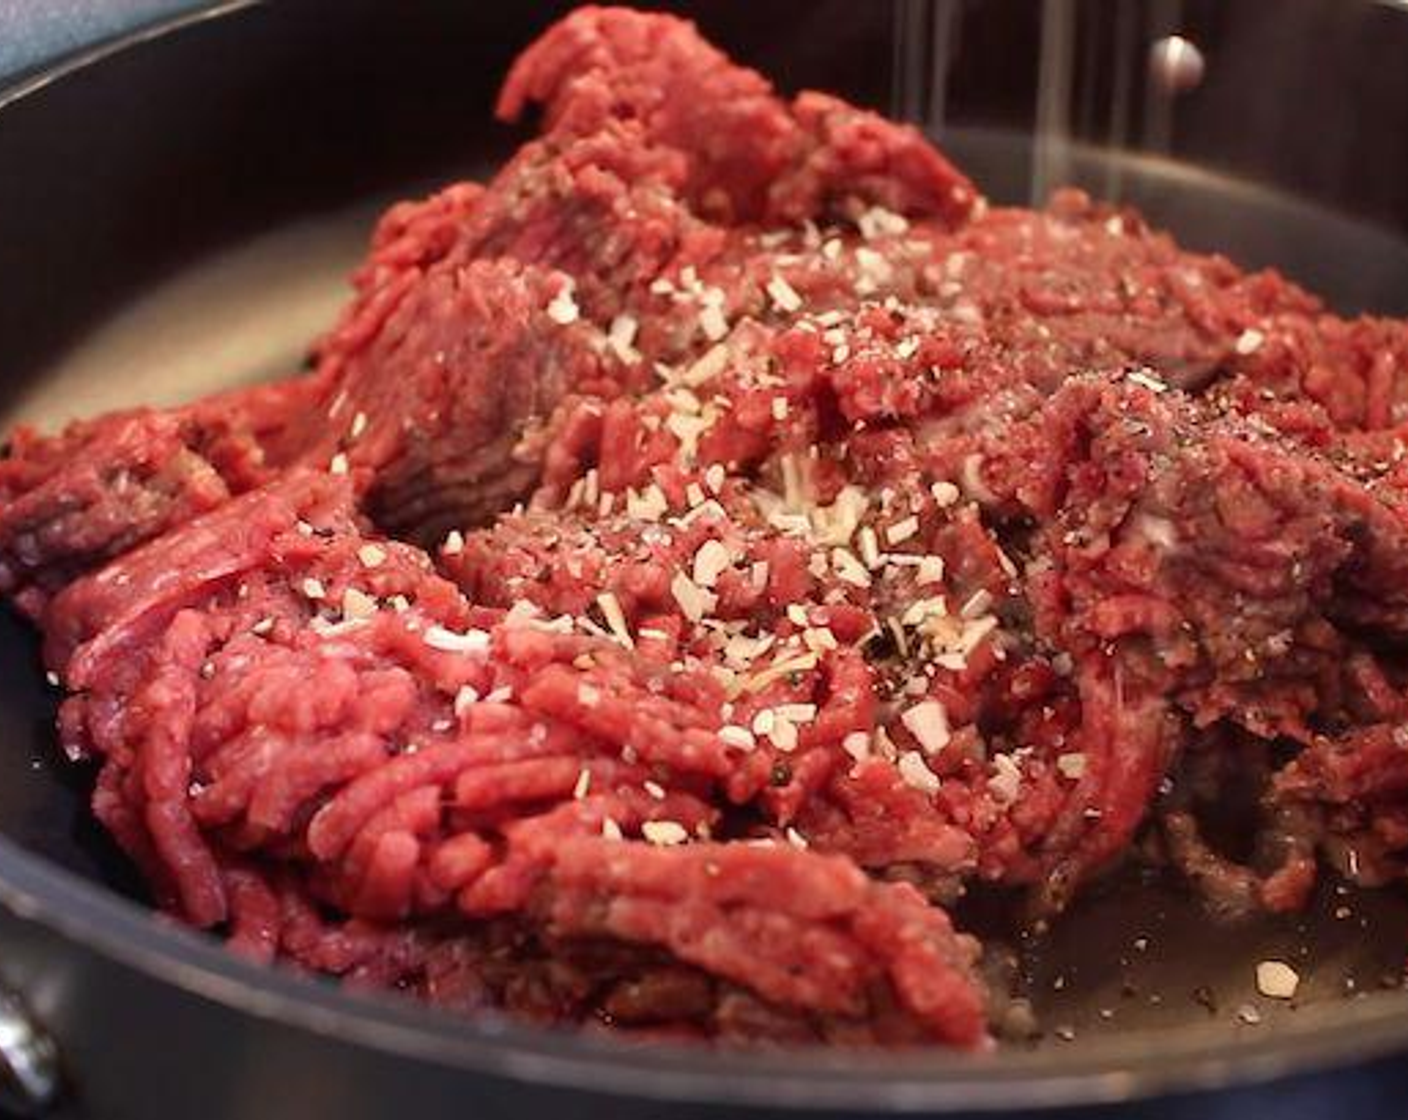 step 1 In a large non-stick pan over medium/high heat, brown the Ground Beef (2 lb), Onion Flakes (2 Tbsp), Worcestershire Sauce (1 Tbsp), Salt (to taste), and Ground Black Pepper (to taste). Drain excess grease and transfer to a large casserole dish.